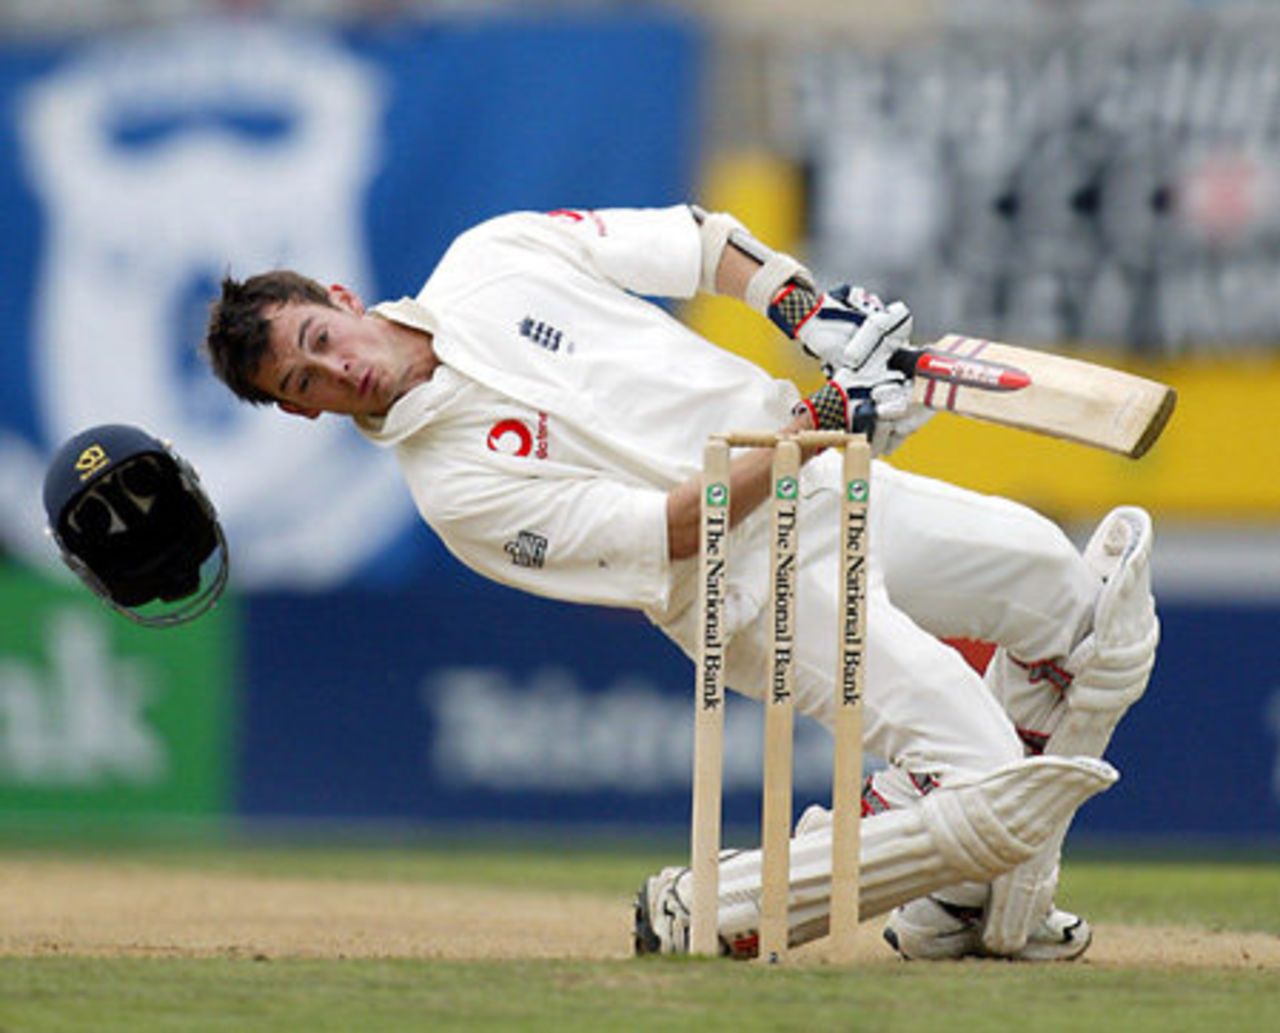 England batsman James Foster loses his helmet as he sways back to avoid a short delivery from New Zealand bowler Andre Adams during his second innings of 23. 3rd Test: New Zealand v England at Eden Park, Auckland, 30 March-3 April 2002 (3 April 2002).